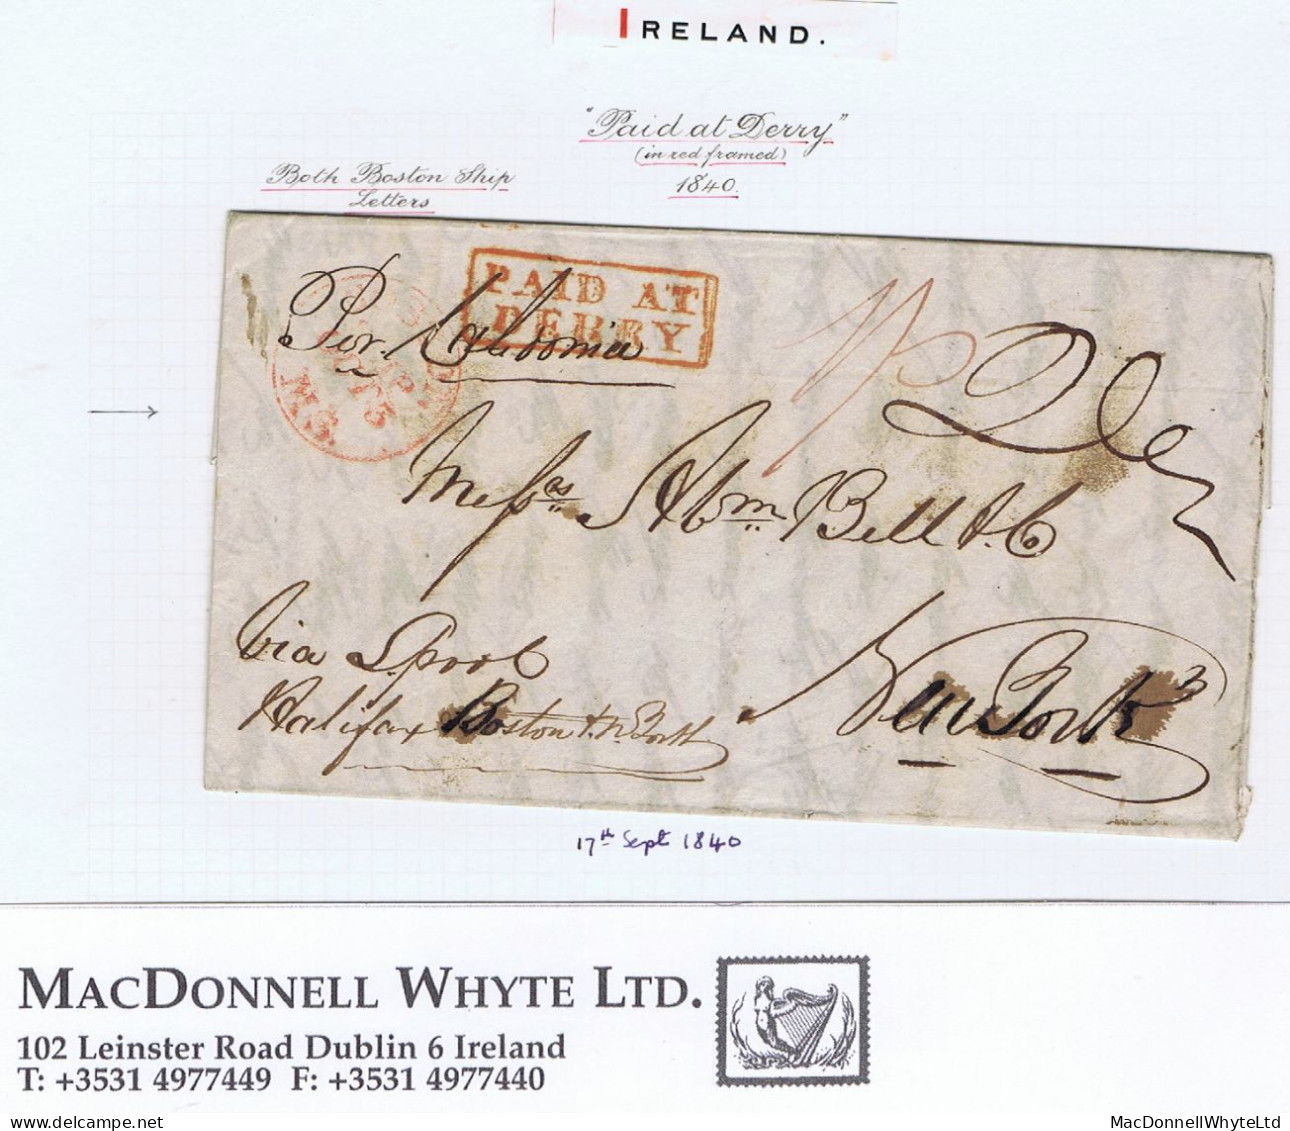 Ireland Derry TransatlanticUS 1840 Letter Londonderry To New York Paid "1/-" With Boxed PAID AT/DERRY In Red BOSTON/SHIP - Vorphilatelie